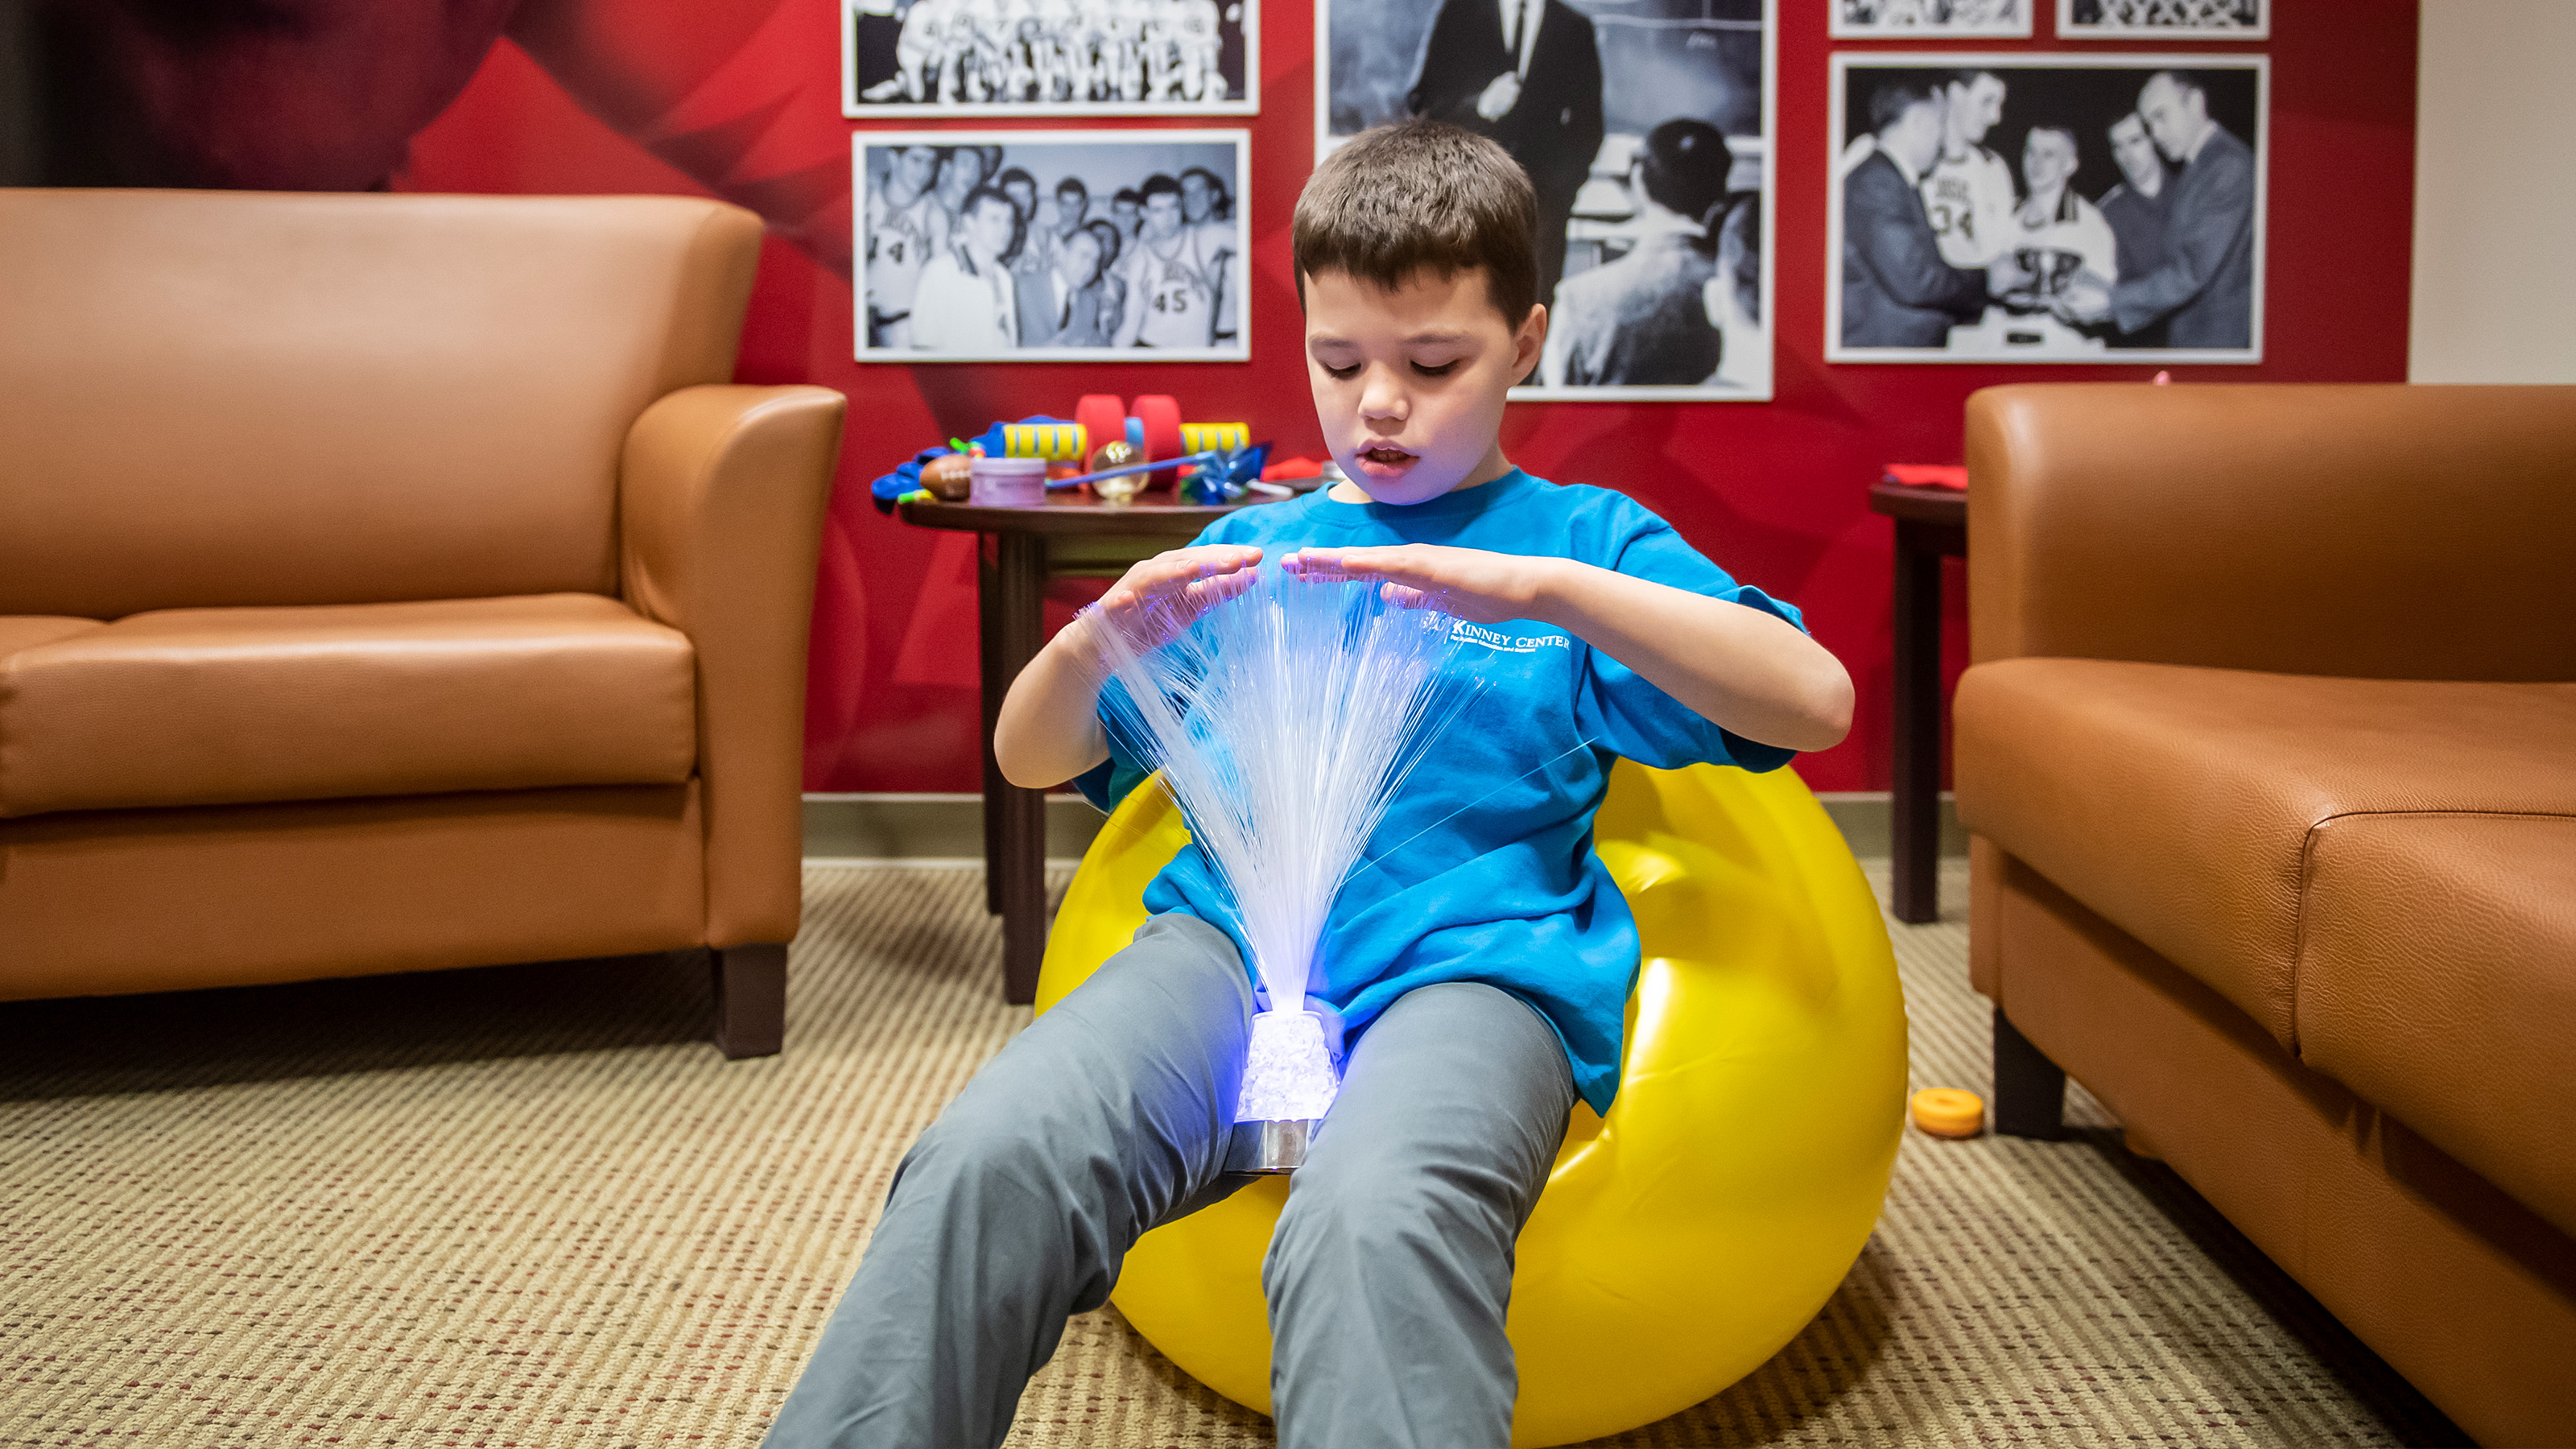 Young student sitting on yellow yoga ball playing with a sensory-friendly toy